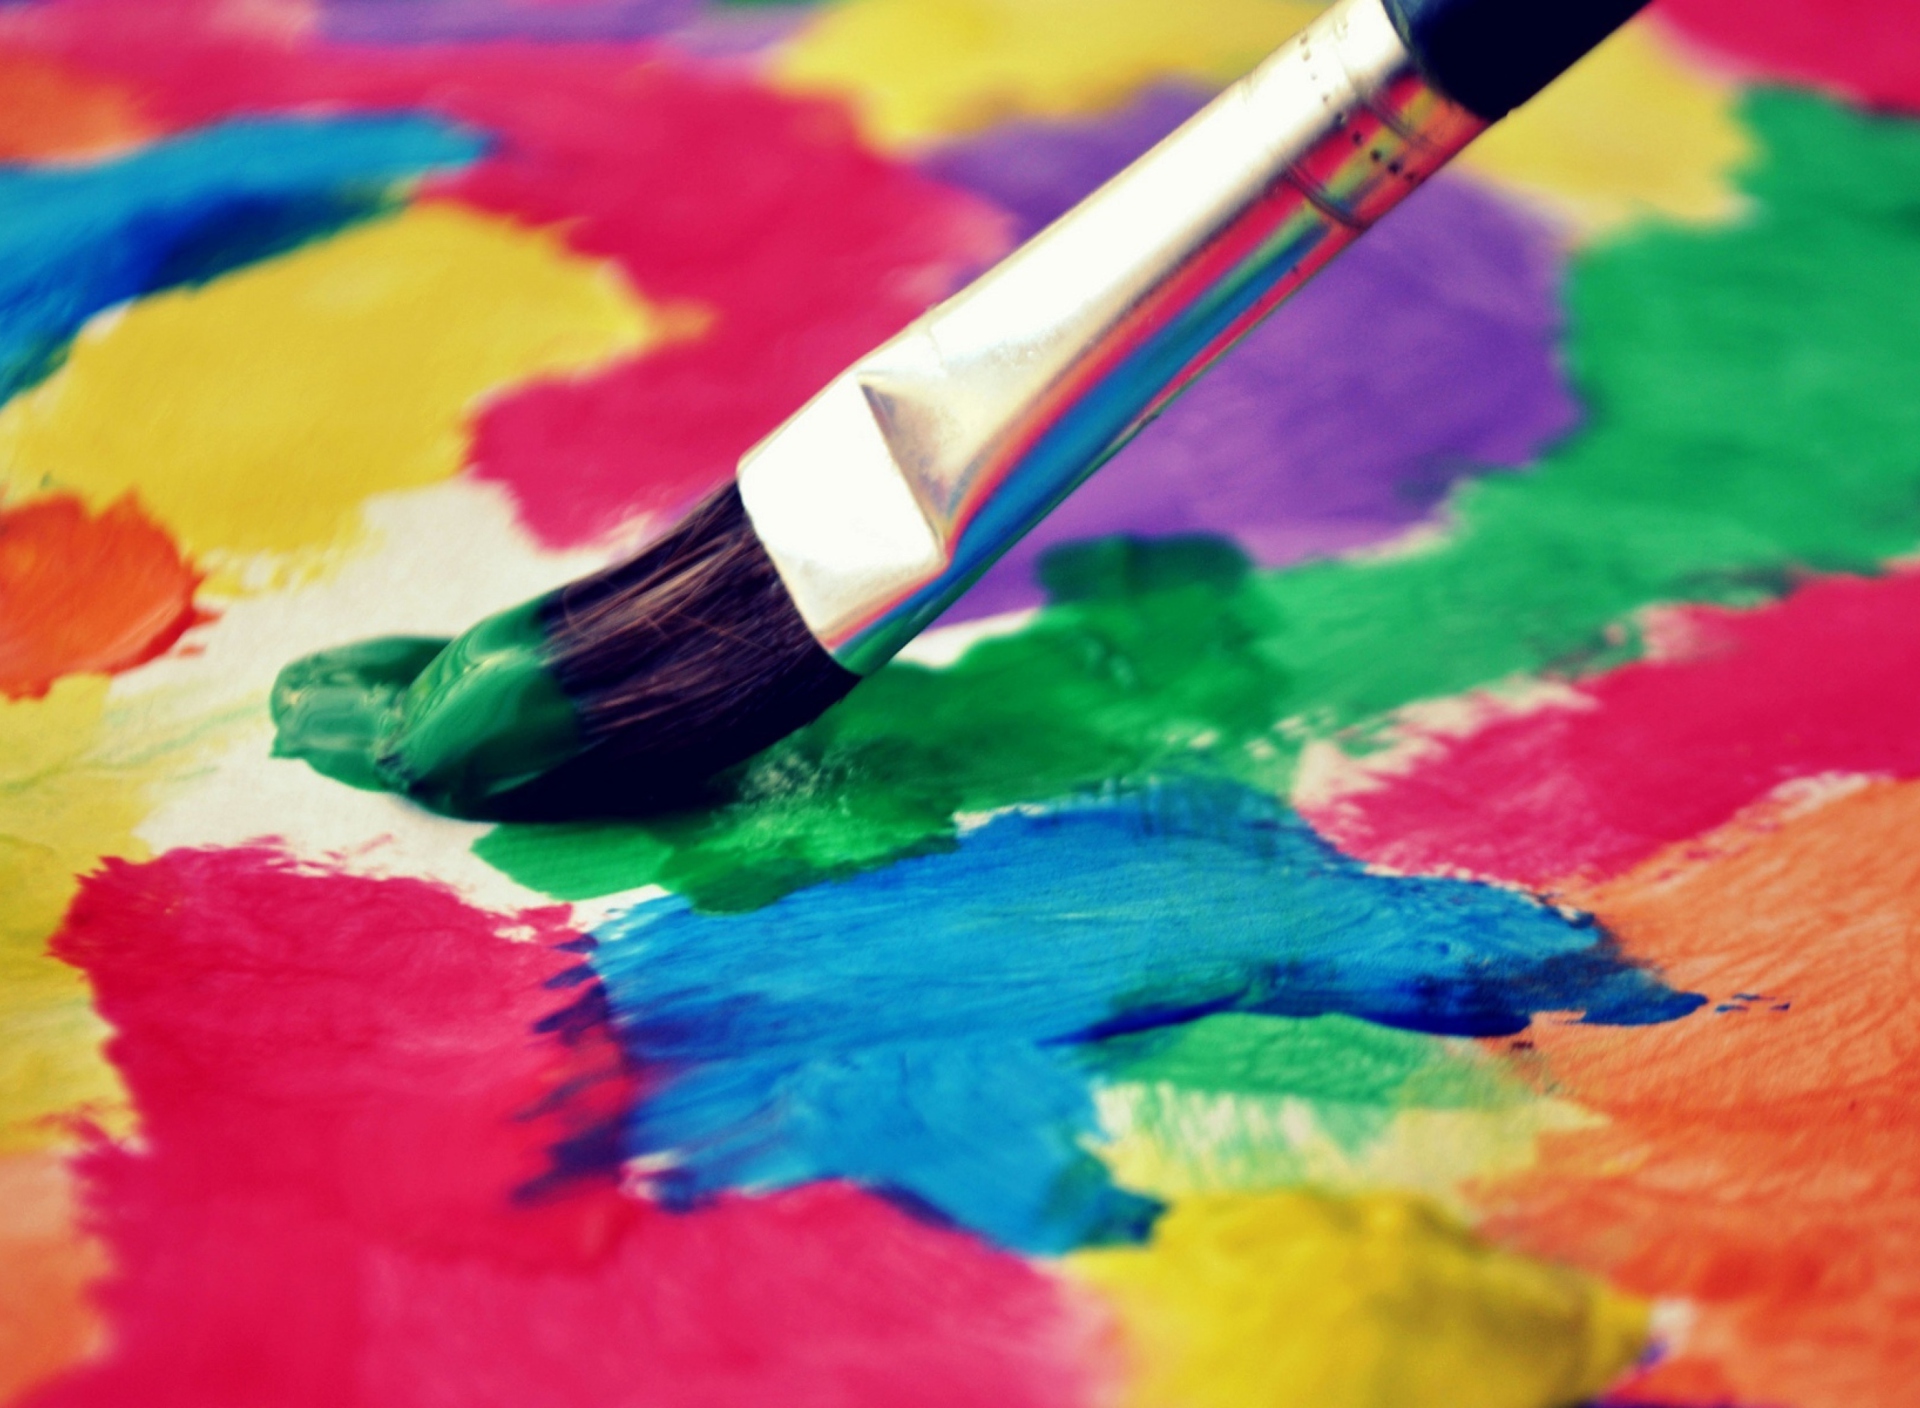 Art Brush And Colorful Paint wallpaper 1920x1408